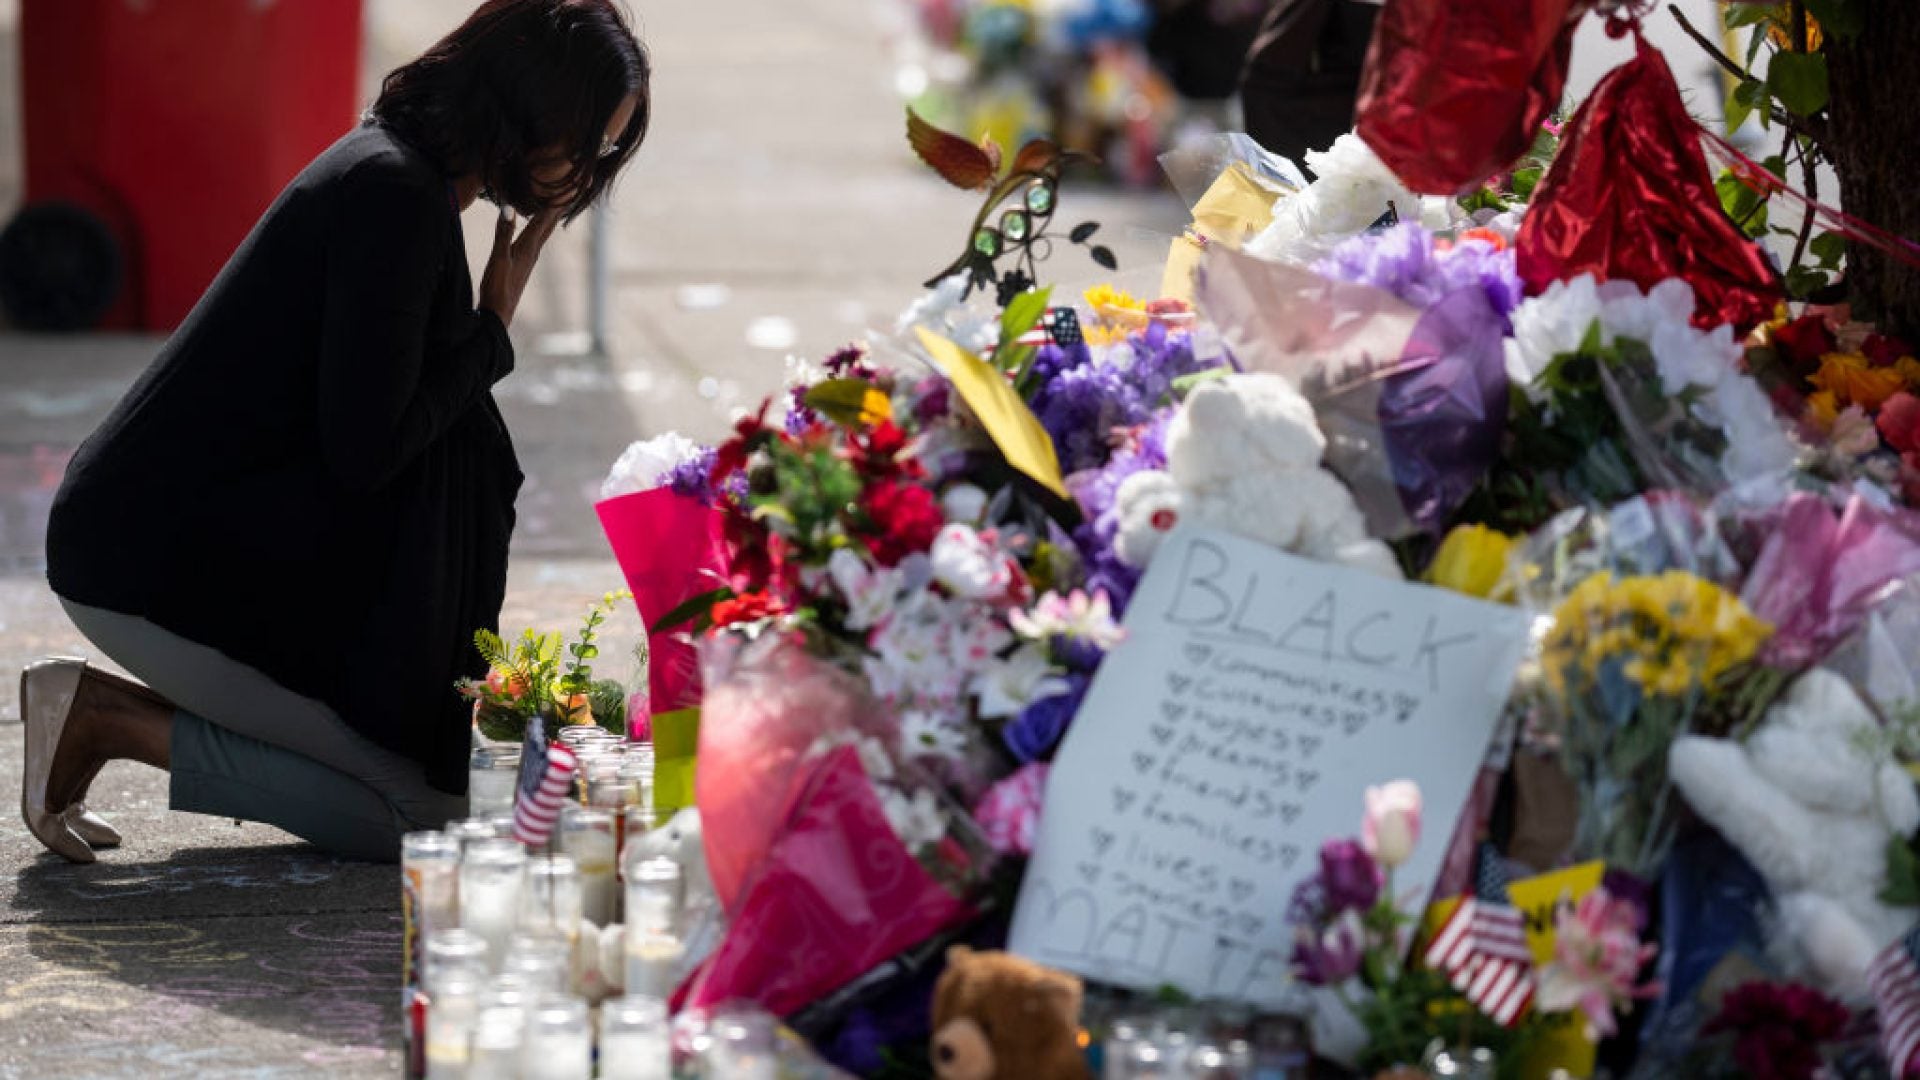 How The Buffalo Shooting And Other Acts Of Anti-Black Violence Are Impacting Our Mental Health